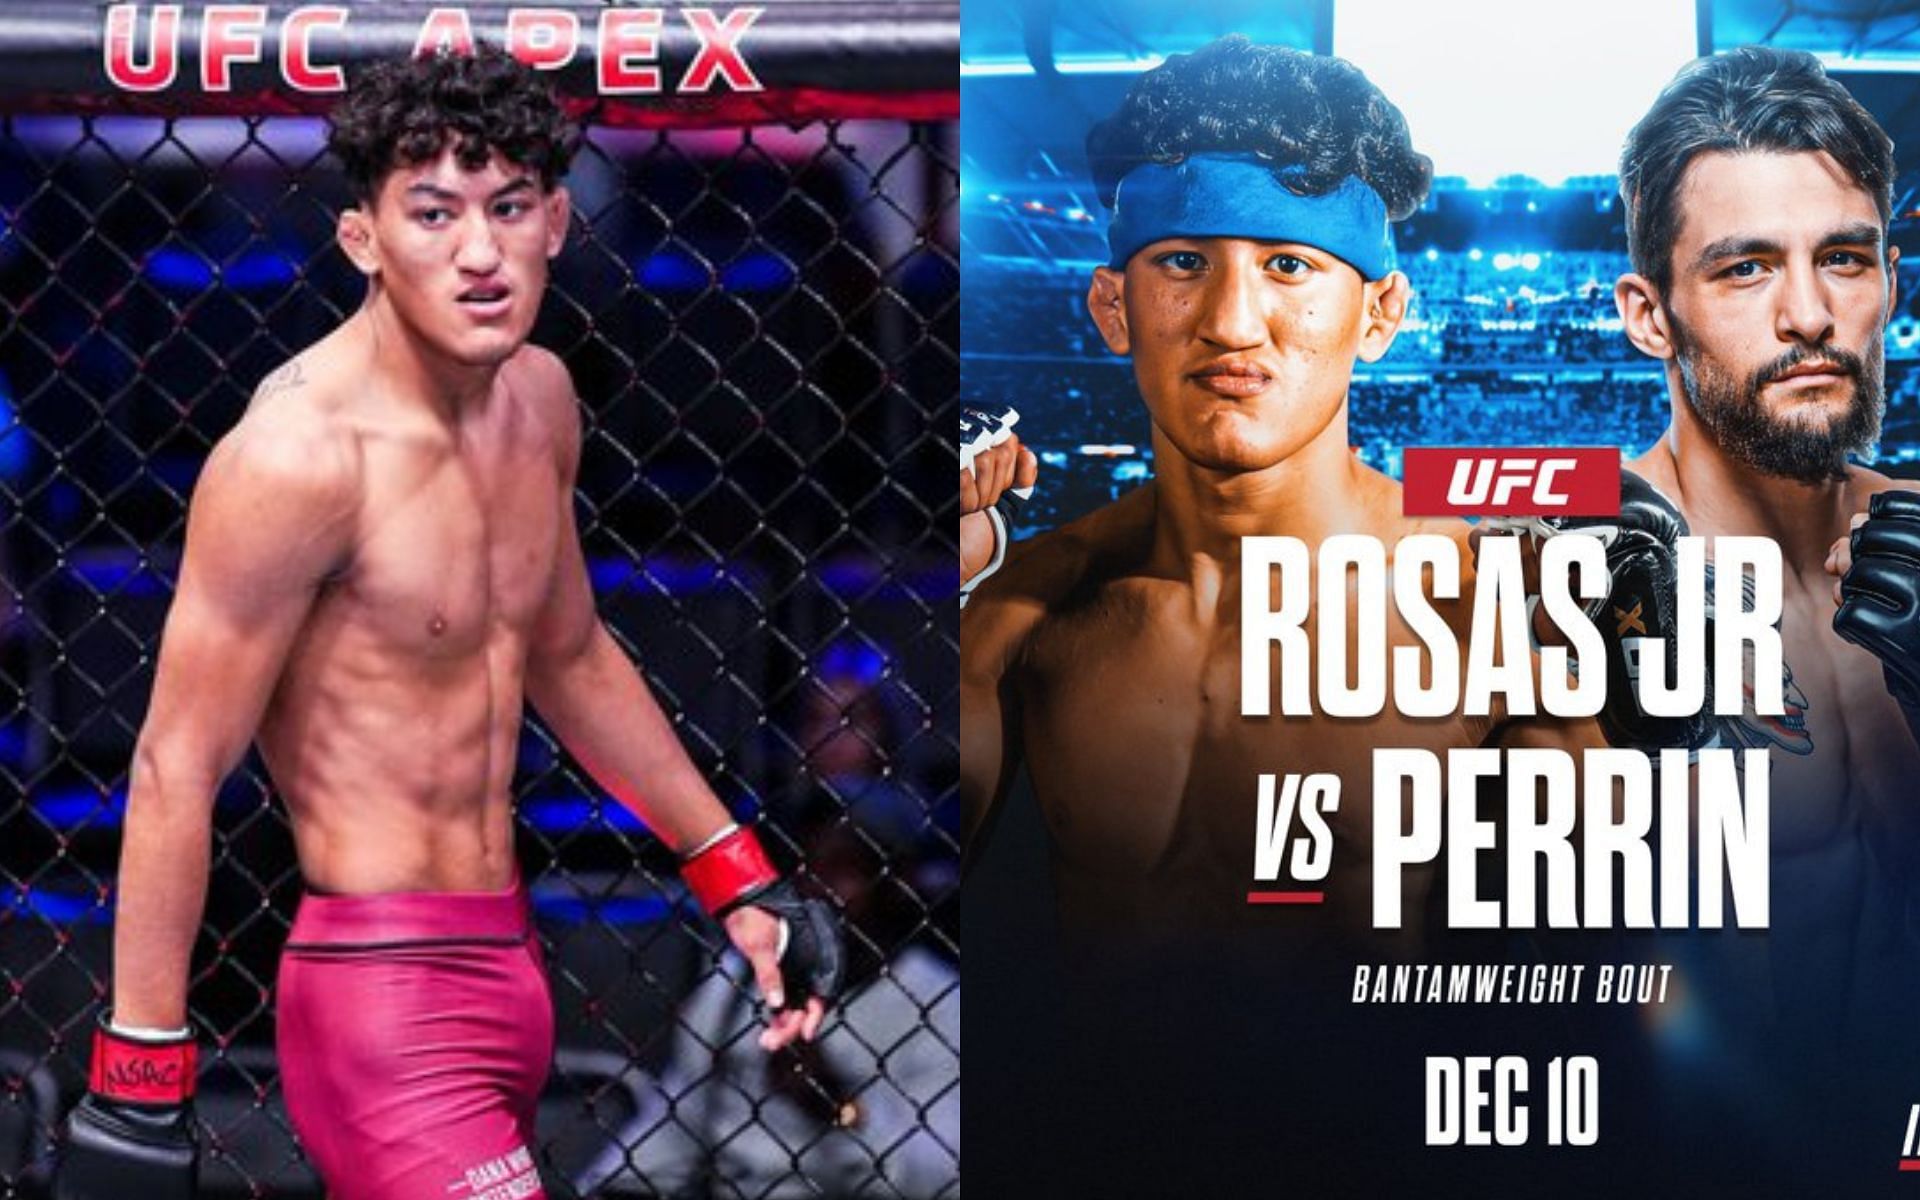 Raul Rosas Jr. (left) and Official fight poster for Raul Rosas Jr. vs Jay Perrin (right) (Image credits Getty Images)